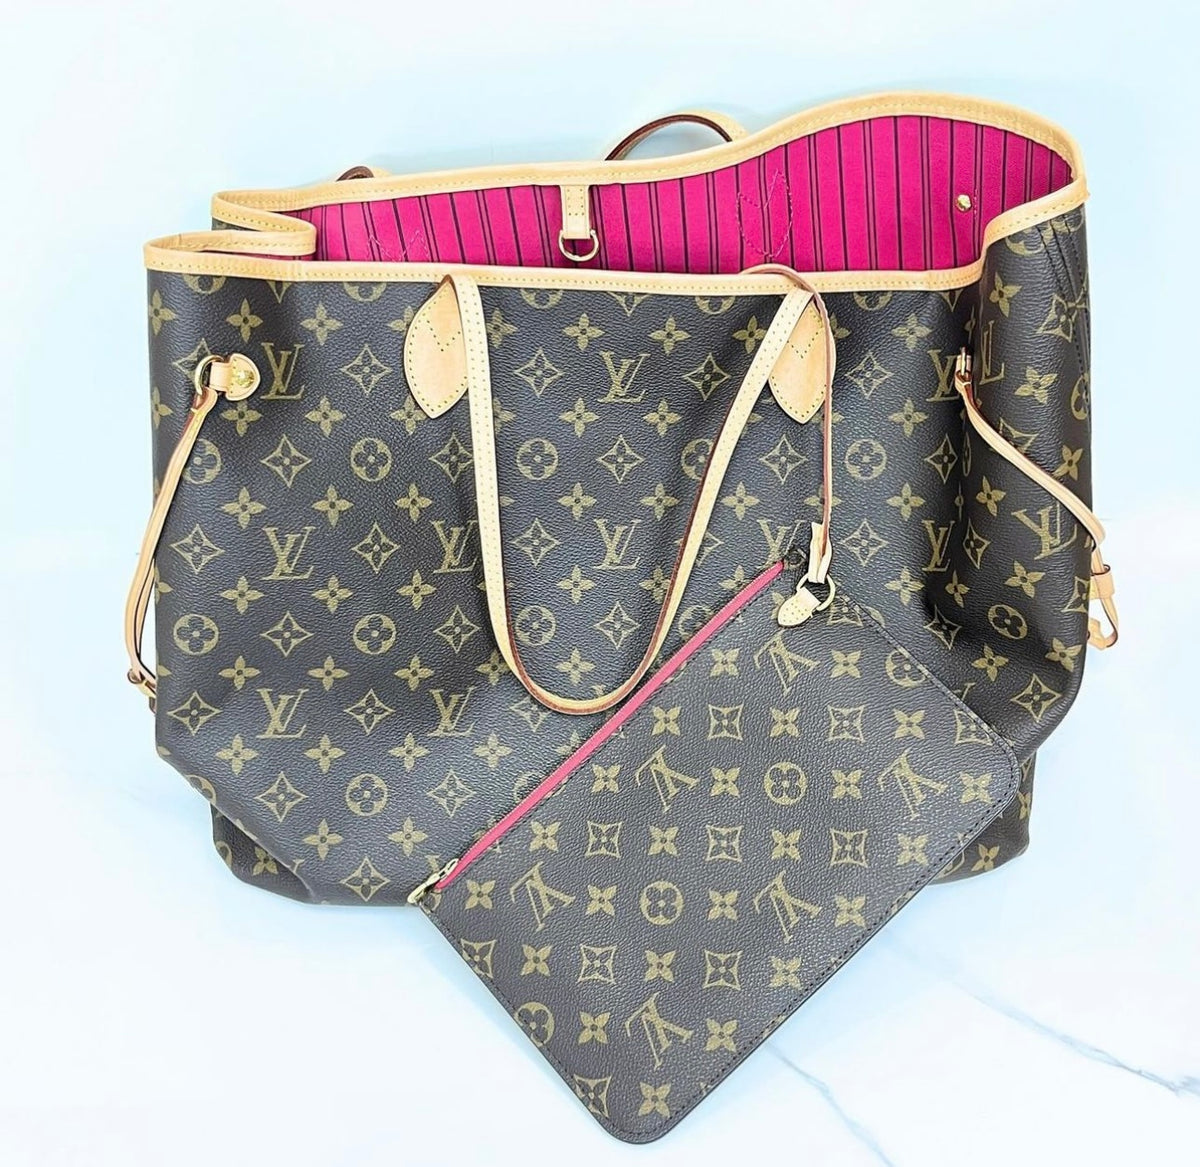 Does Dillards Sell Used Louis Vuitton Bags